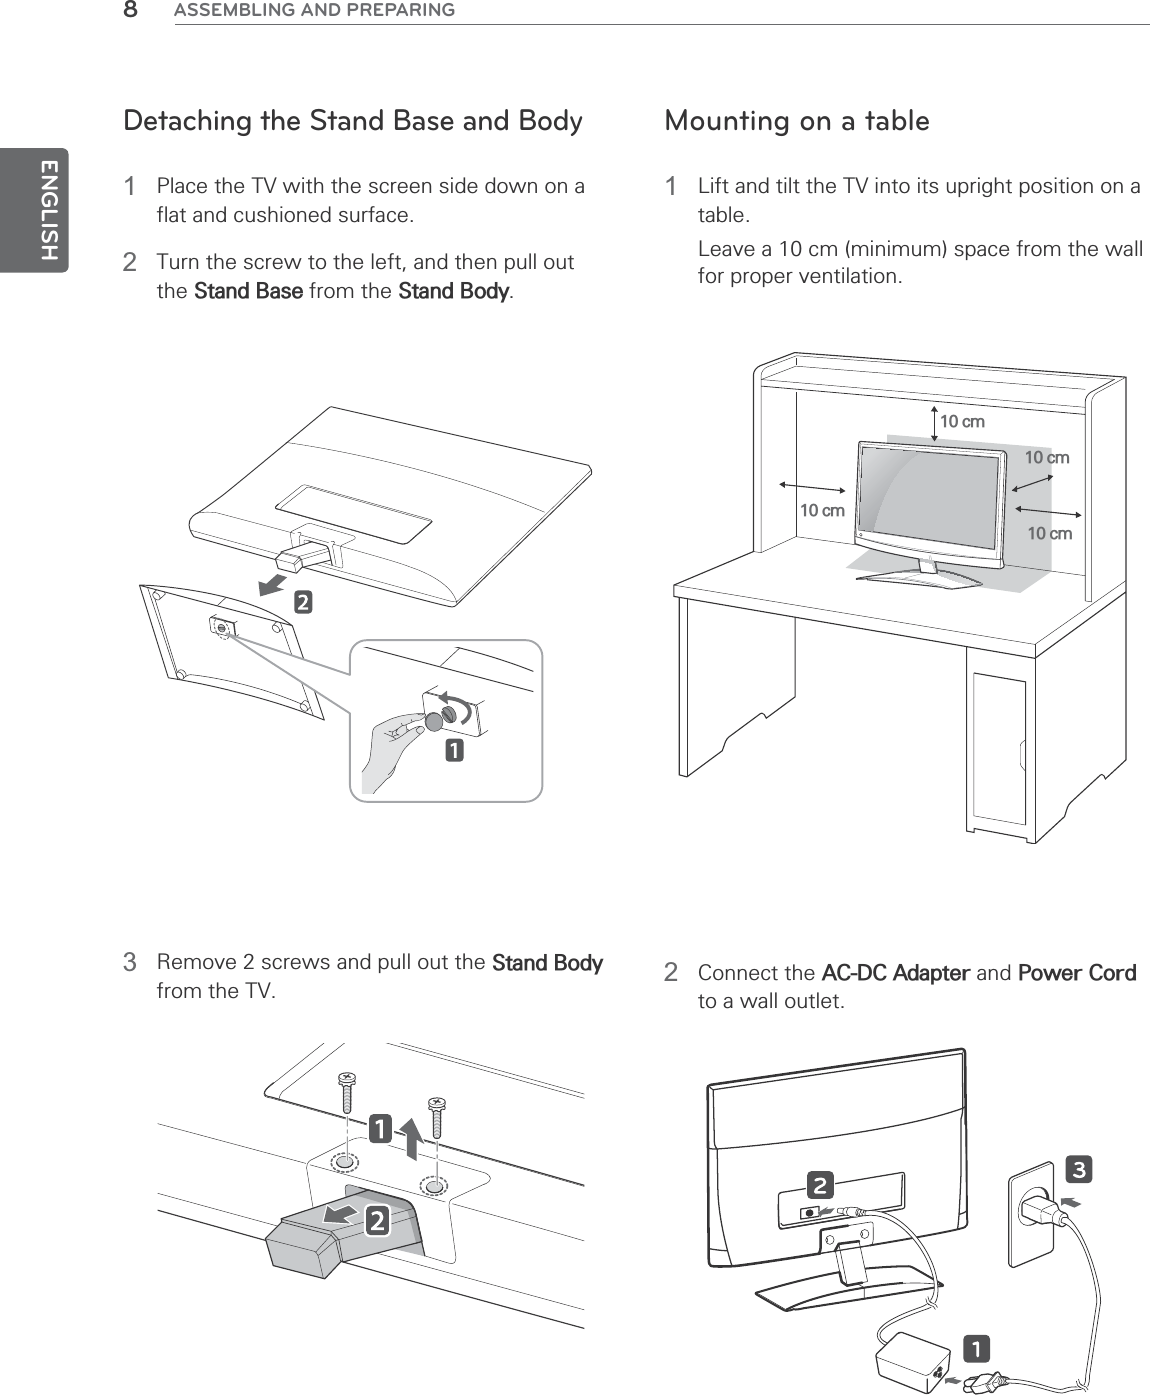 ENGLISH8ASSEMBLING AND PREPARINGDetaching the Stand Base and Body1  Place the TV with the screen side down on a flat and cushioned surface.2  Turn the screw to the left, and then pull out the Stand Base from the Stand Body.3  Remove 2 screws and pull out the Stand Body from the TV.Mounting on a table1  Lift and tilt the TV into its upright position on a table.Leave a 10 cm (minimum) space from the wall for proper ventilation.10 cm10 cm10 cm10 cm2 Connect the AC-DC Adapter and Power Cord to a wall outlet.